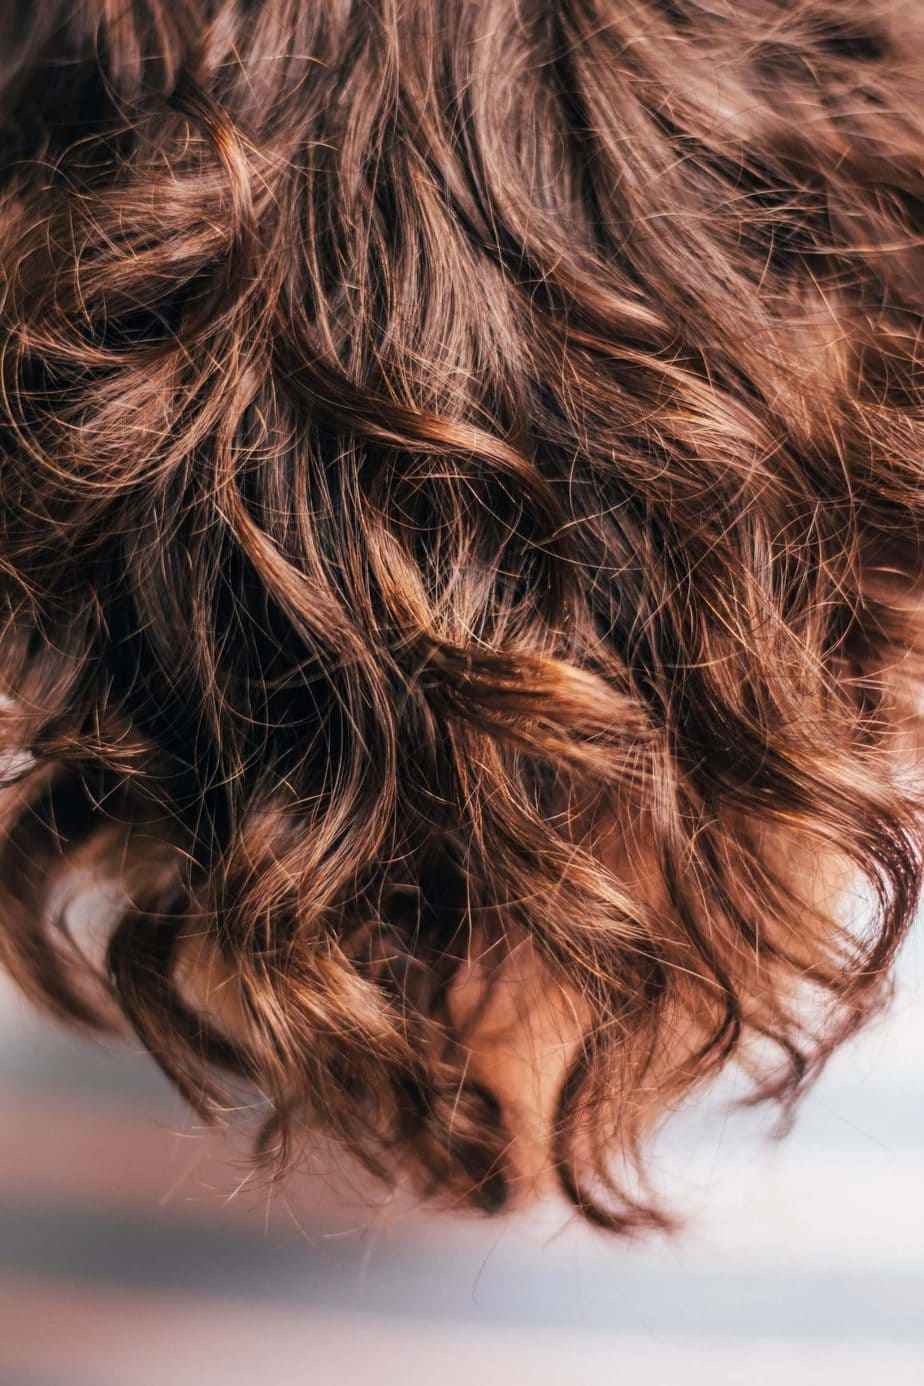 How do I care for my <strong>hair with high</strong> porosity?